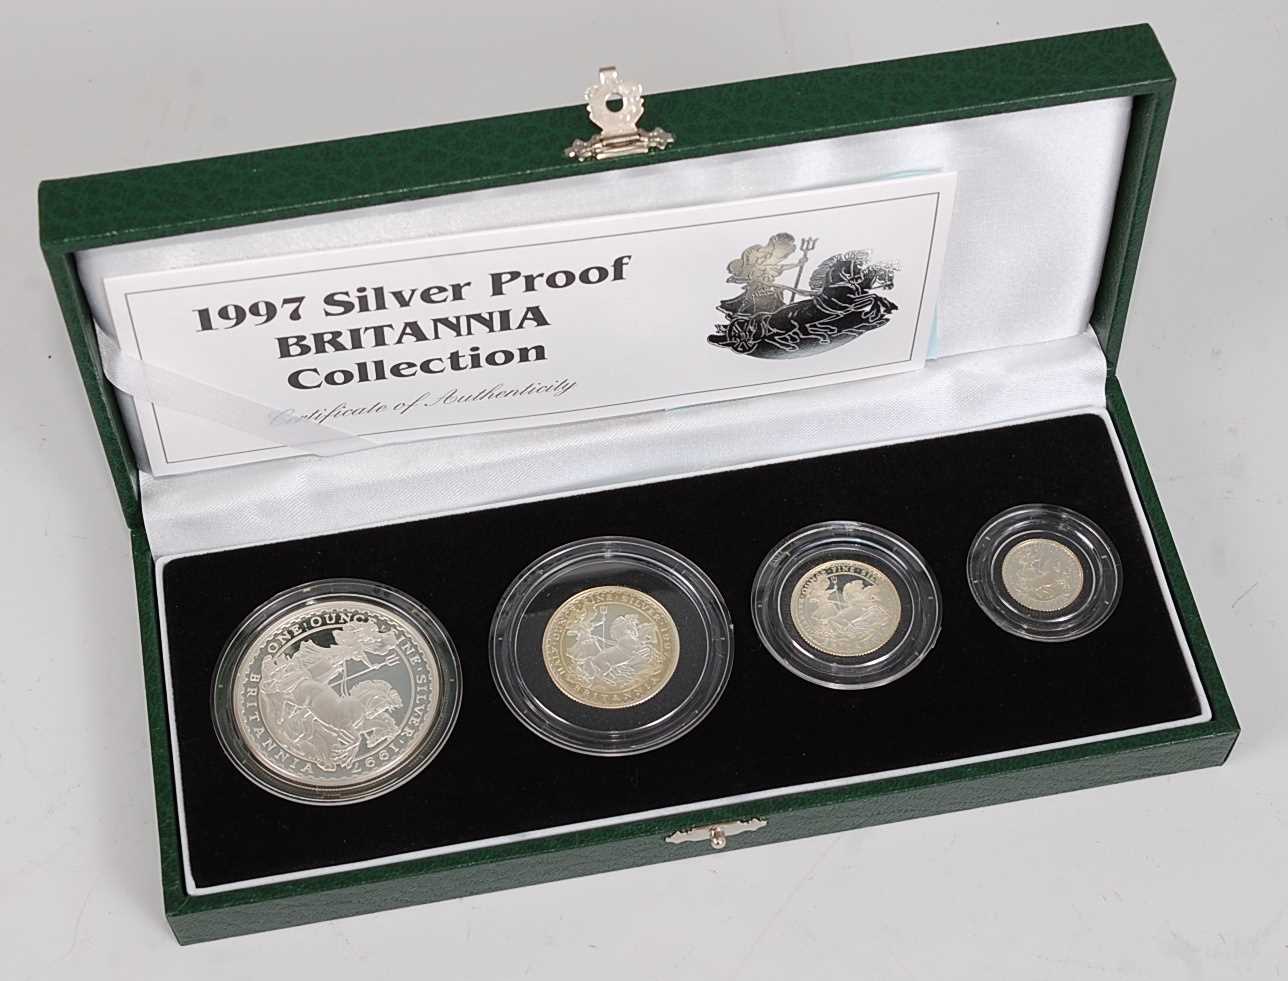 Great Britain, The Royal Mint 1997 Silver Proof Britannia Collection, four coin set, two pounds to